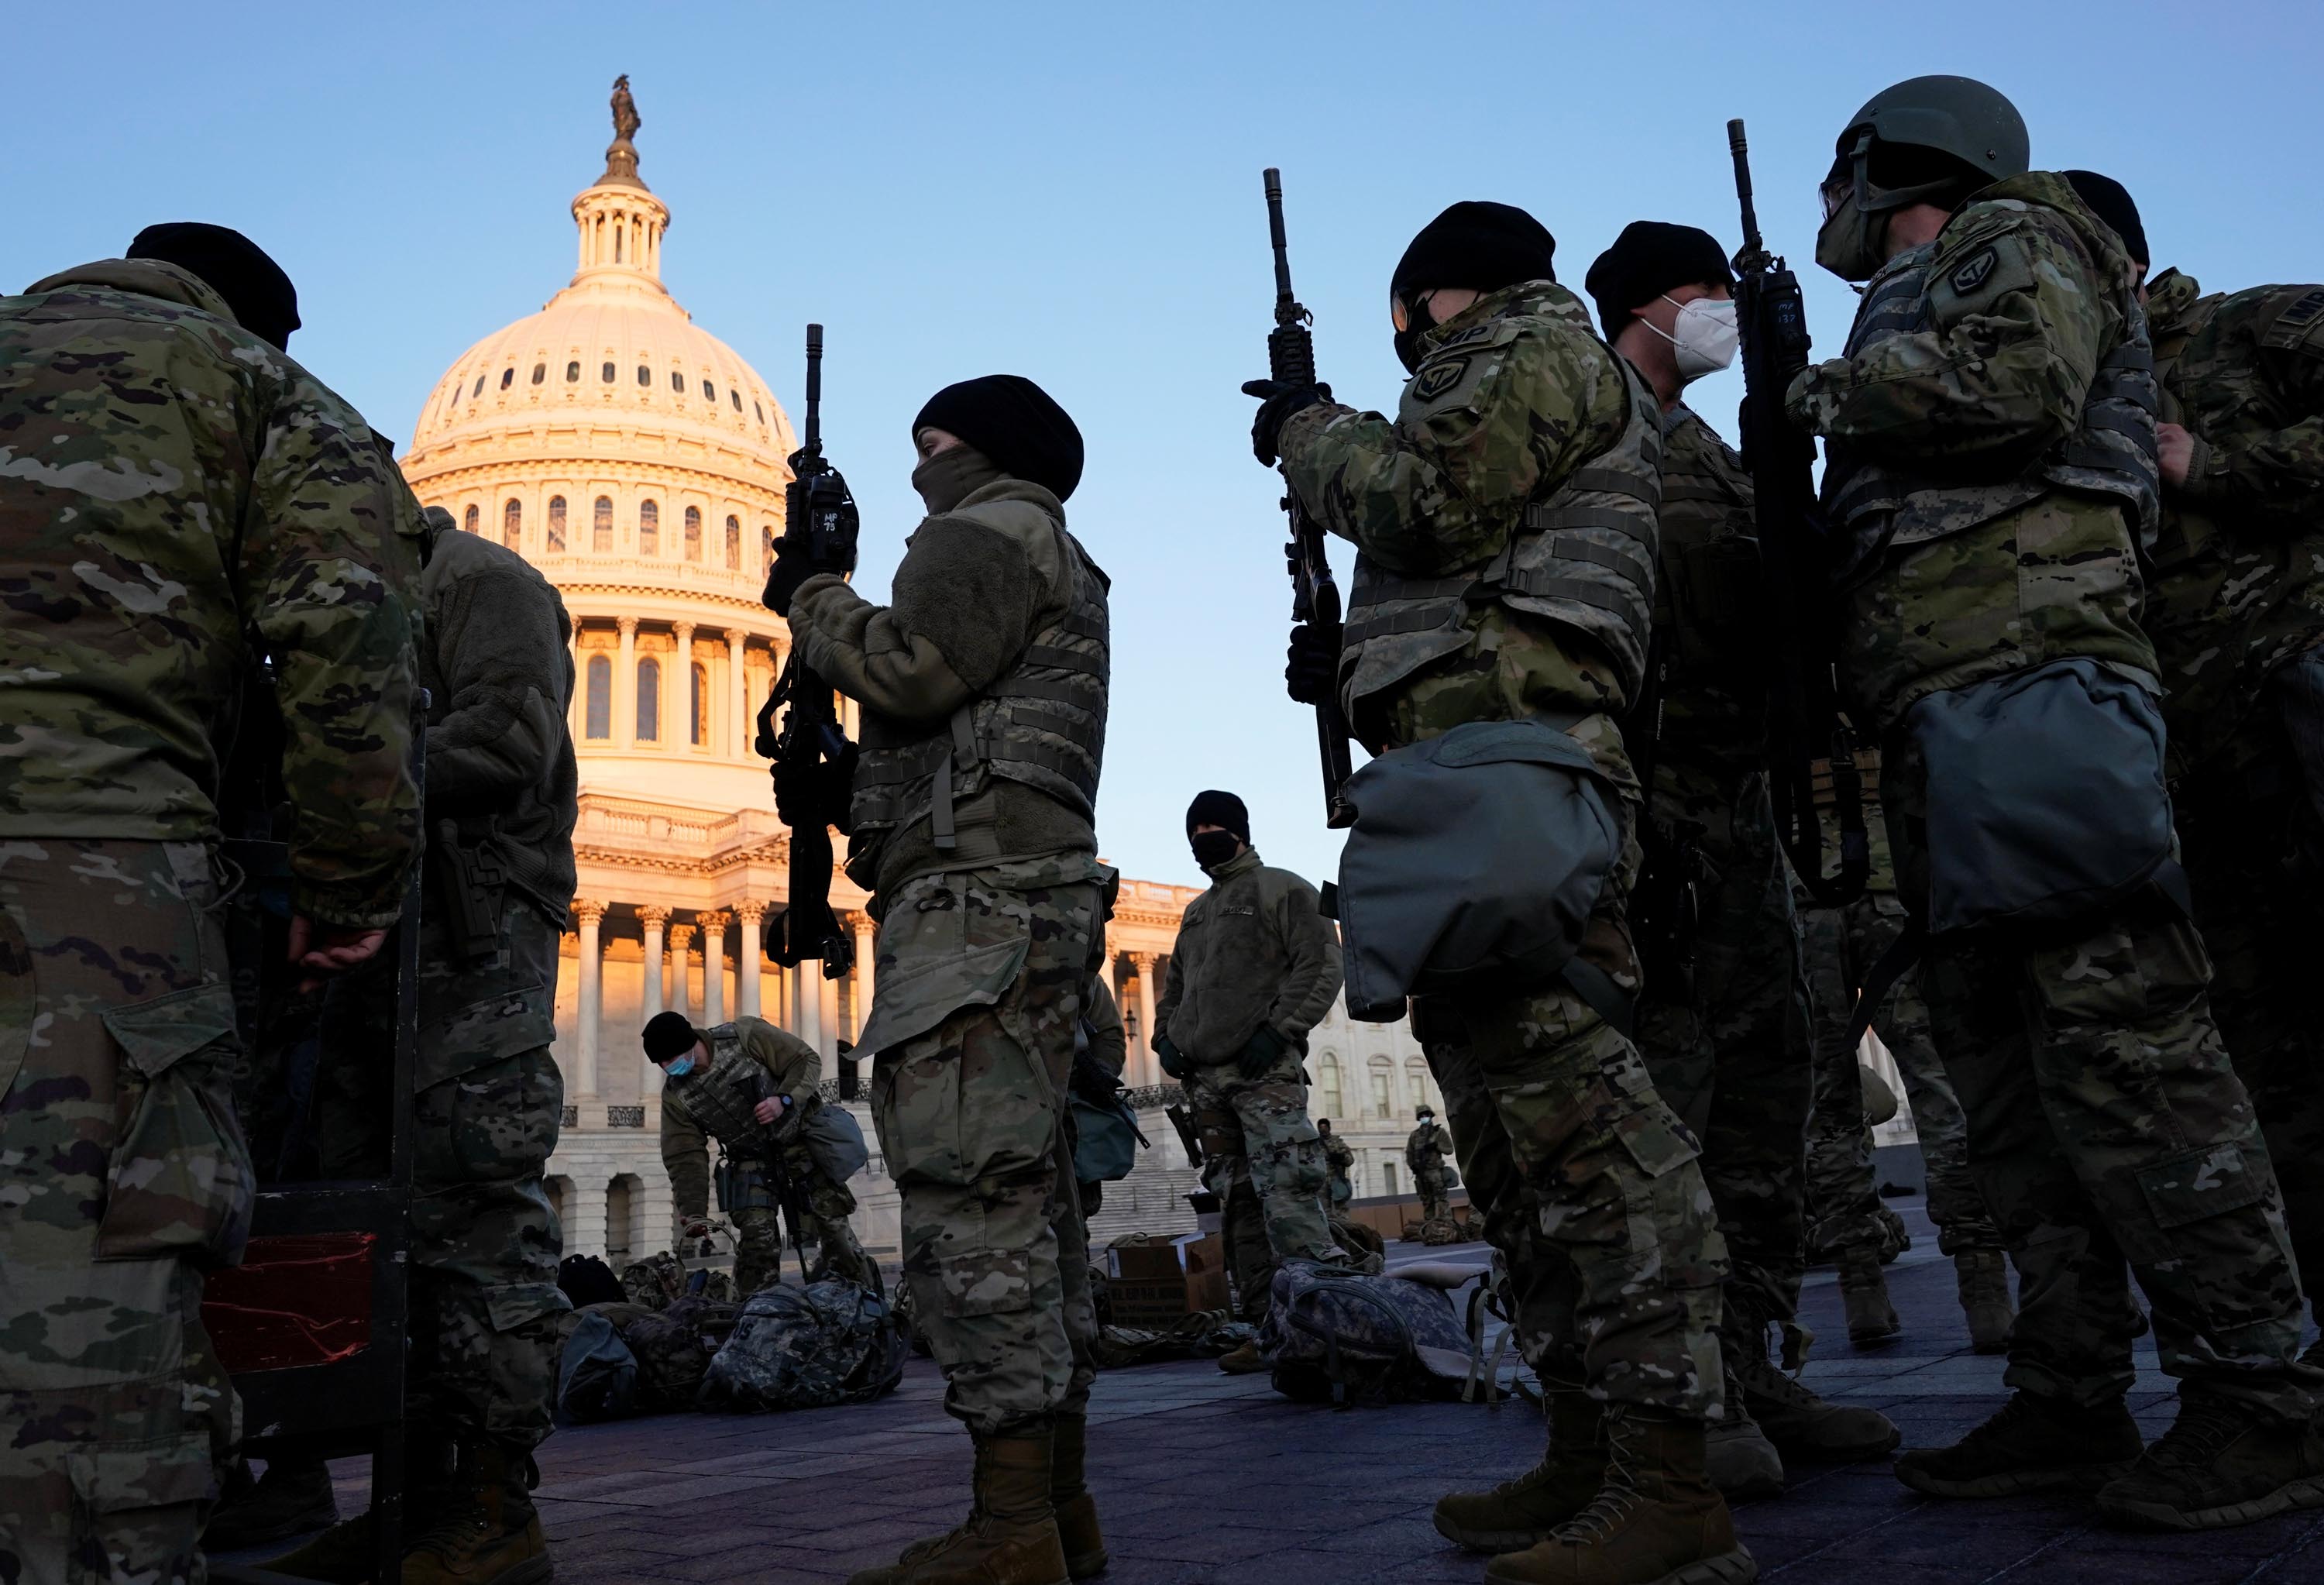 Members of the National Guard are given weapons before Democrats begin debating one article of impeachment against U.S. President Donald Trump at the U.S. Capitol, in Washington, U.S., January 13, 2021. REUTERS/Joshua Roberts